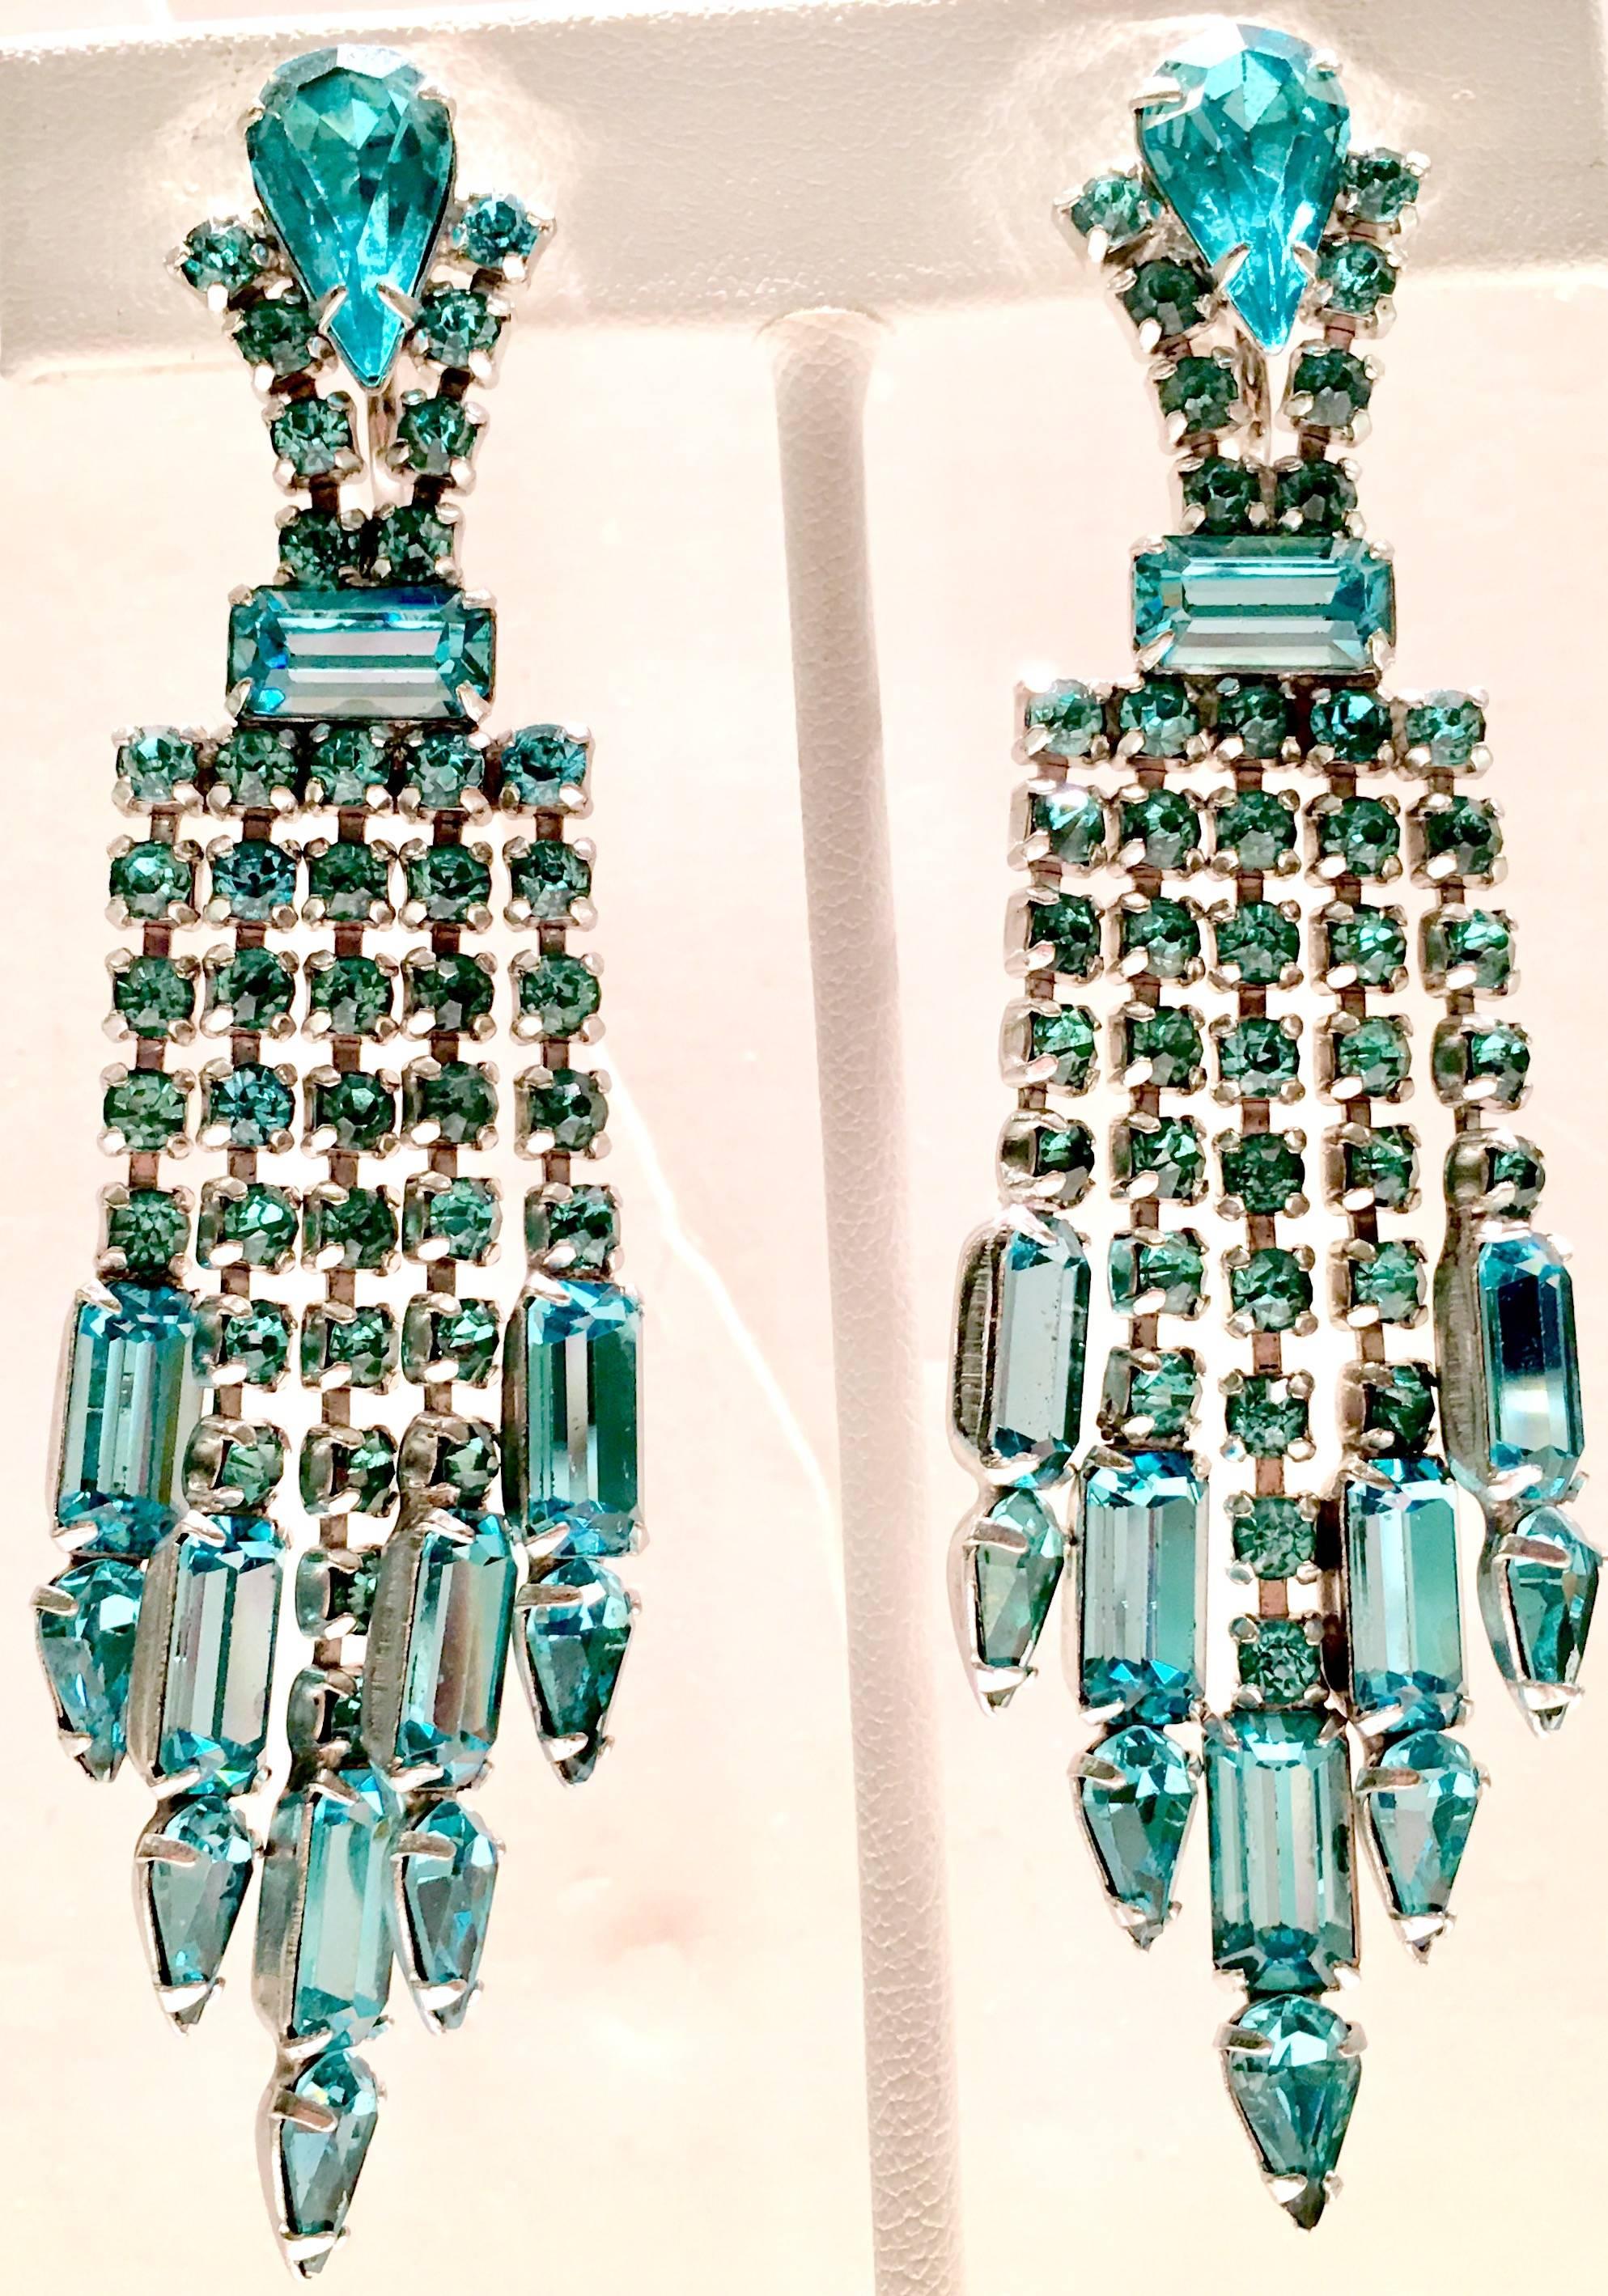 Sparkling 1960'S Weiss style blue sapphire Austrian crystal rhinestone, prong set dangling chandelier earrings. Set in silver tone metal, screw back style and unsigned.